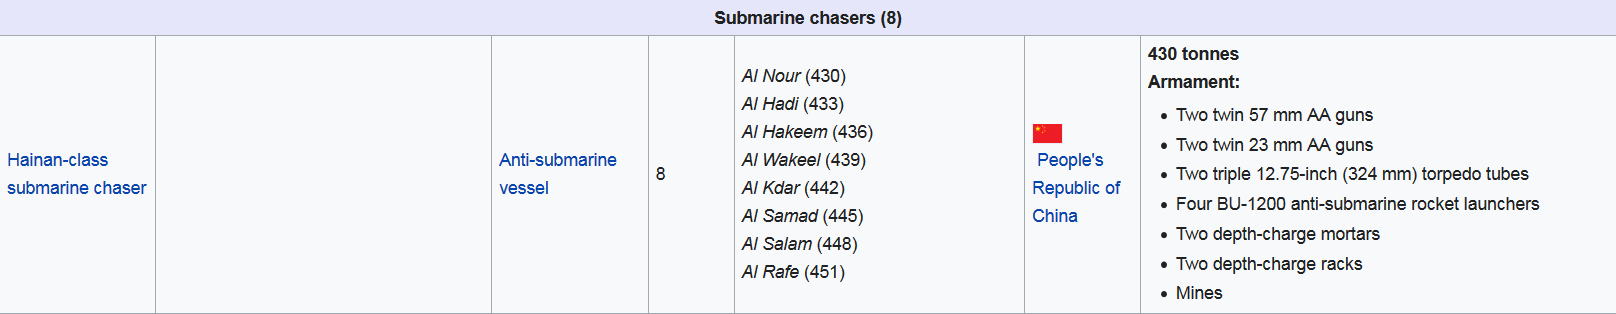 Screenshot_2022-12-10 List of ships of the Egyptian Navy - Wikipedia(1).png